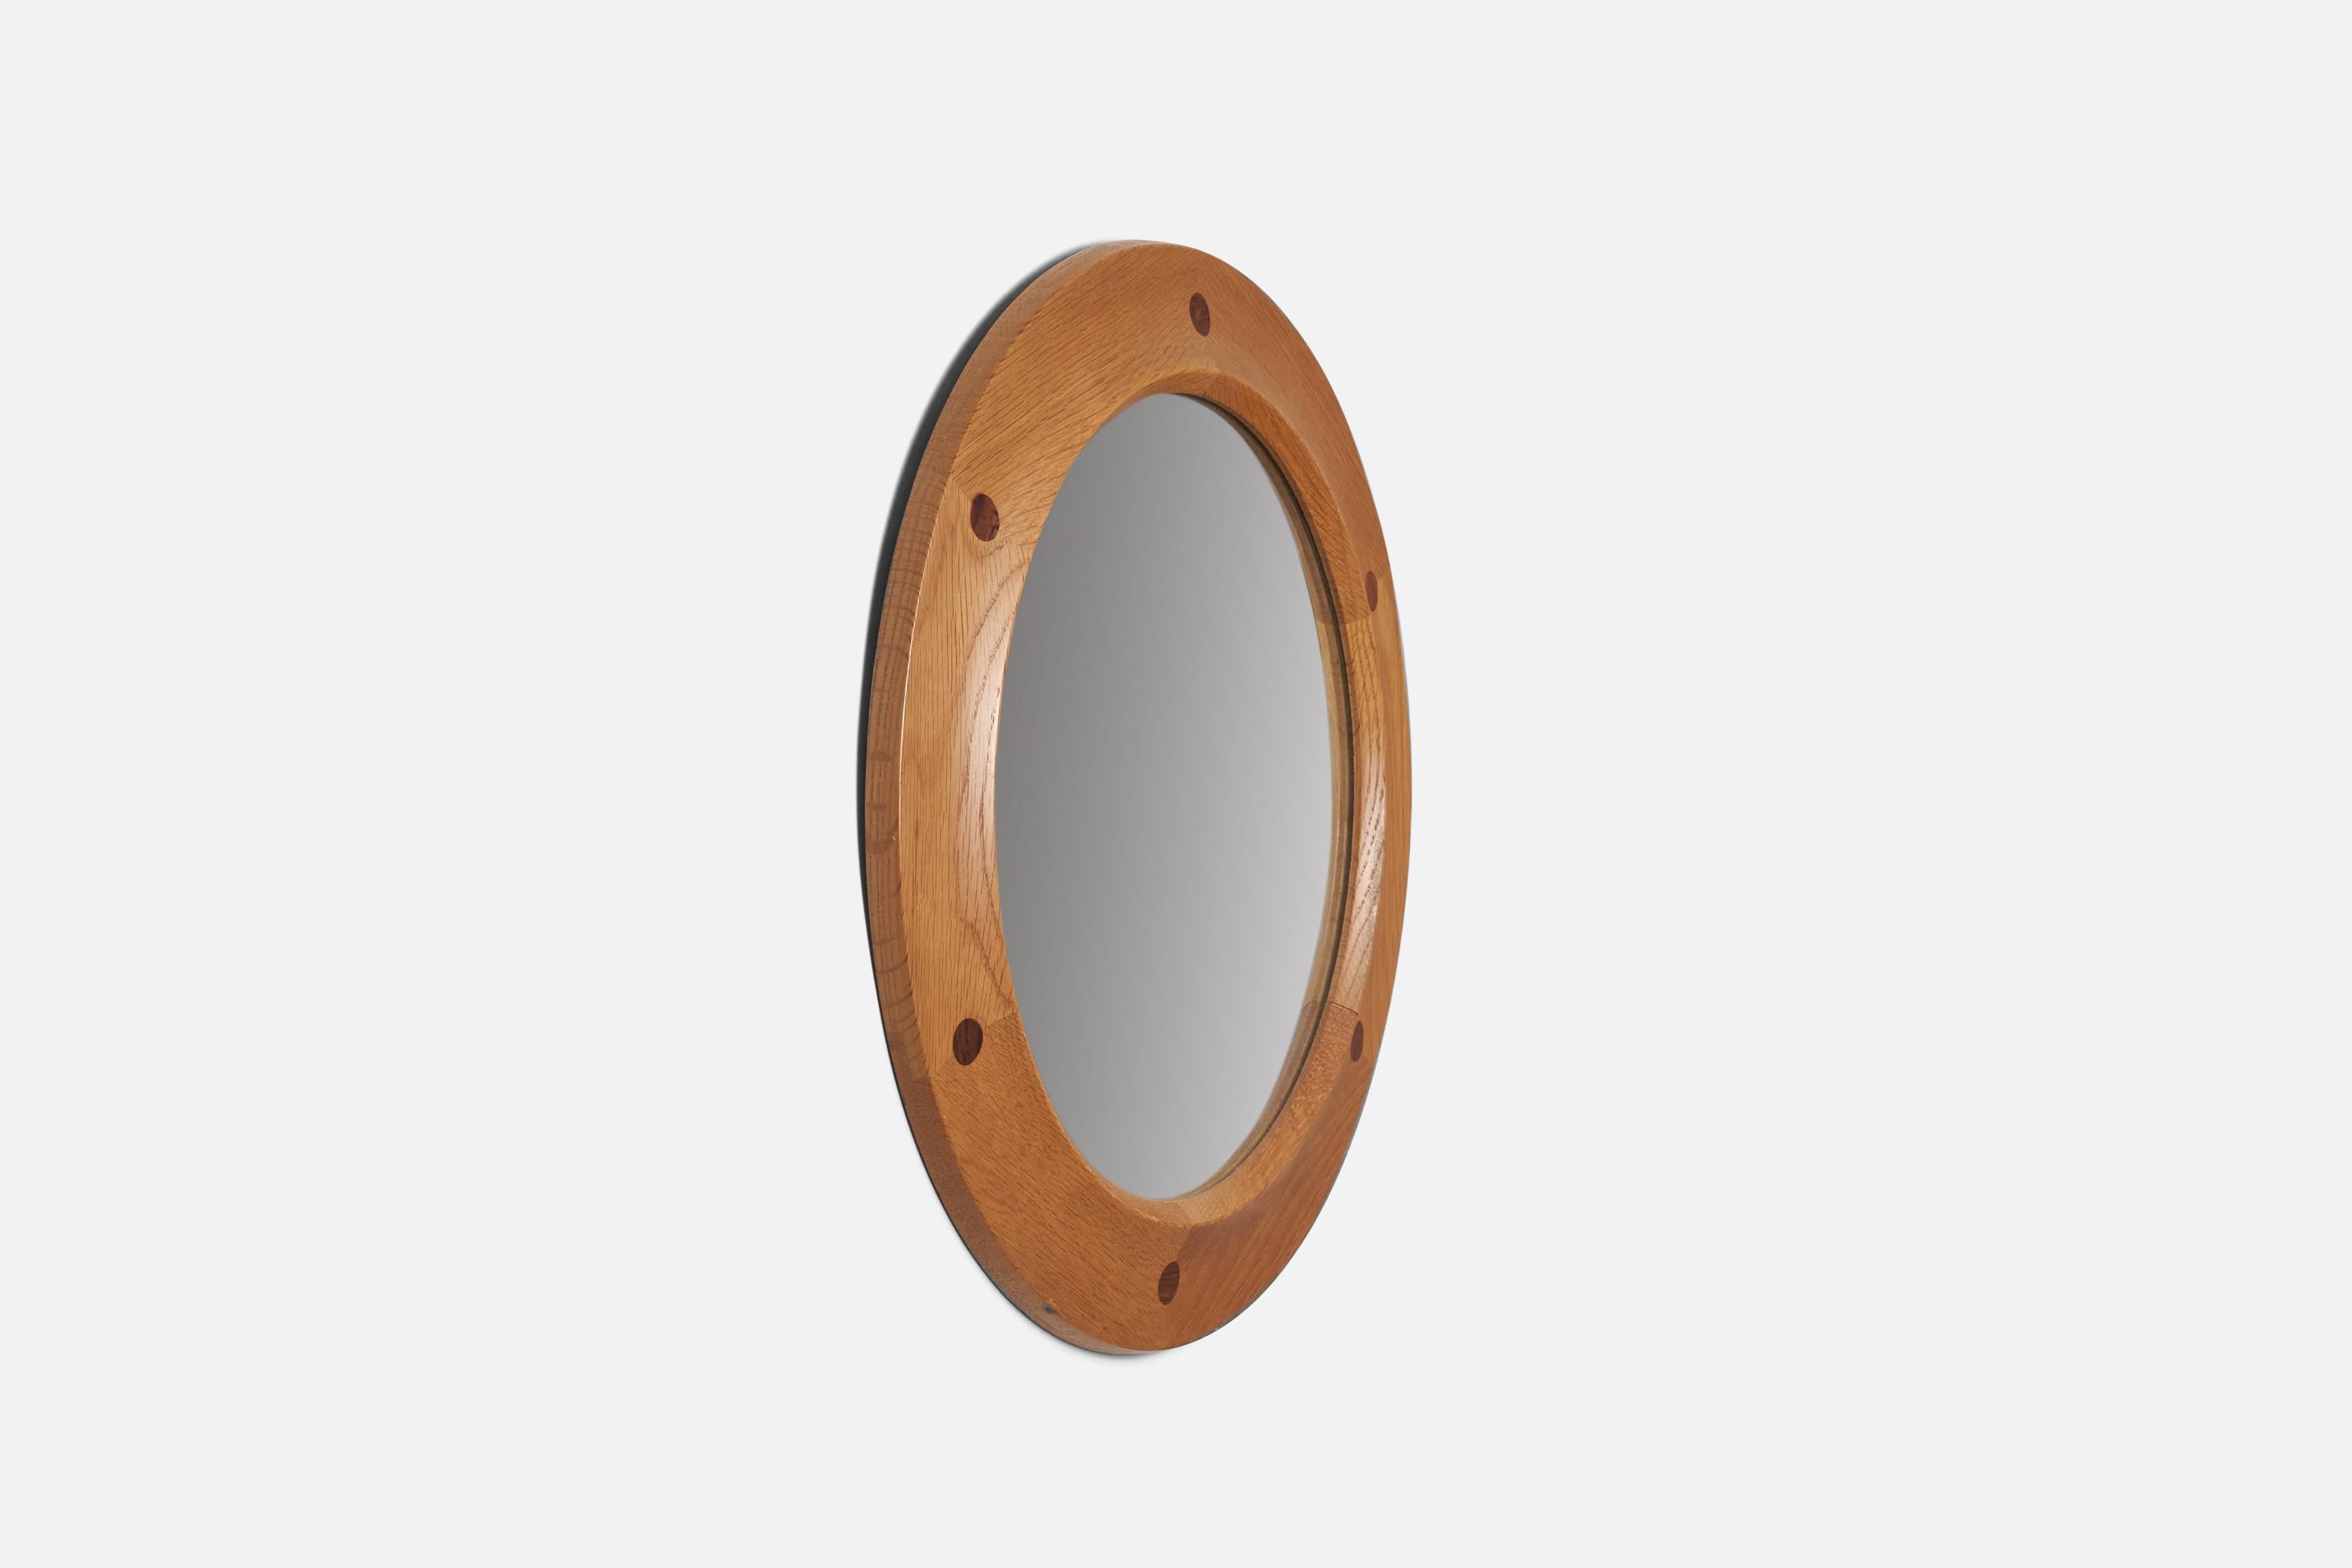 A stained oak and teak wall mirror designed and produced by Fröseke, AB Nybrofabriken, Sweden, 1950s.